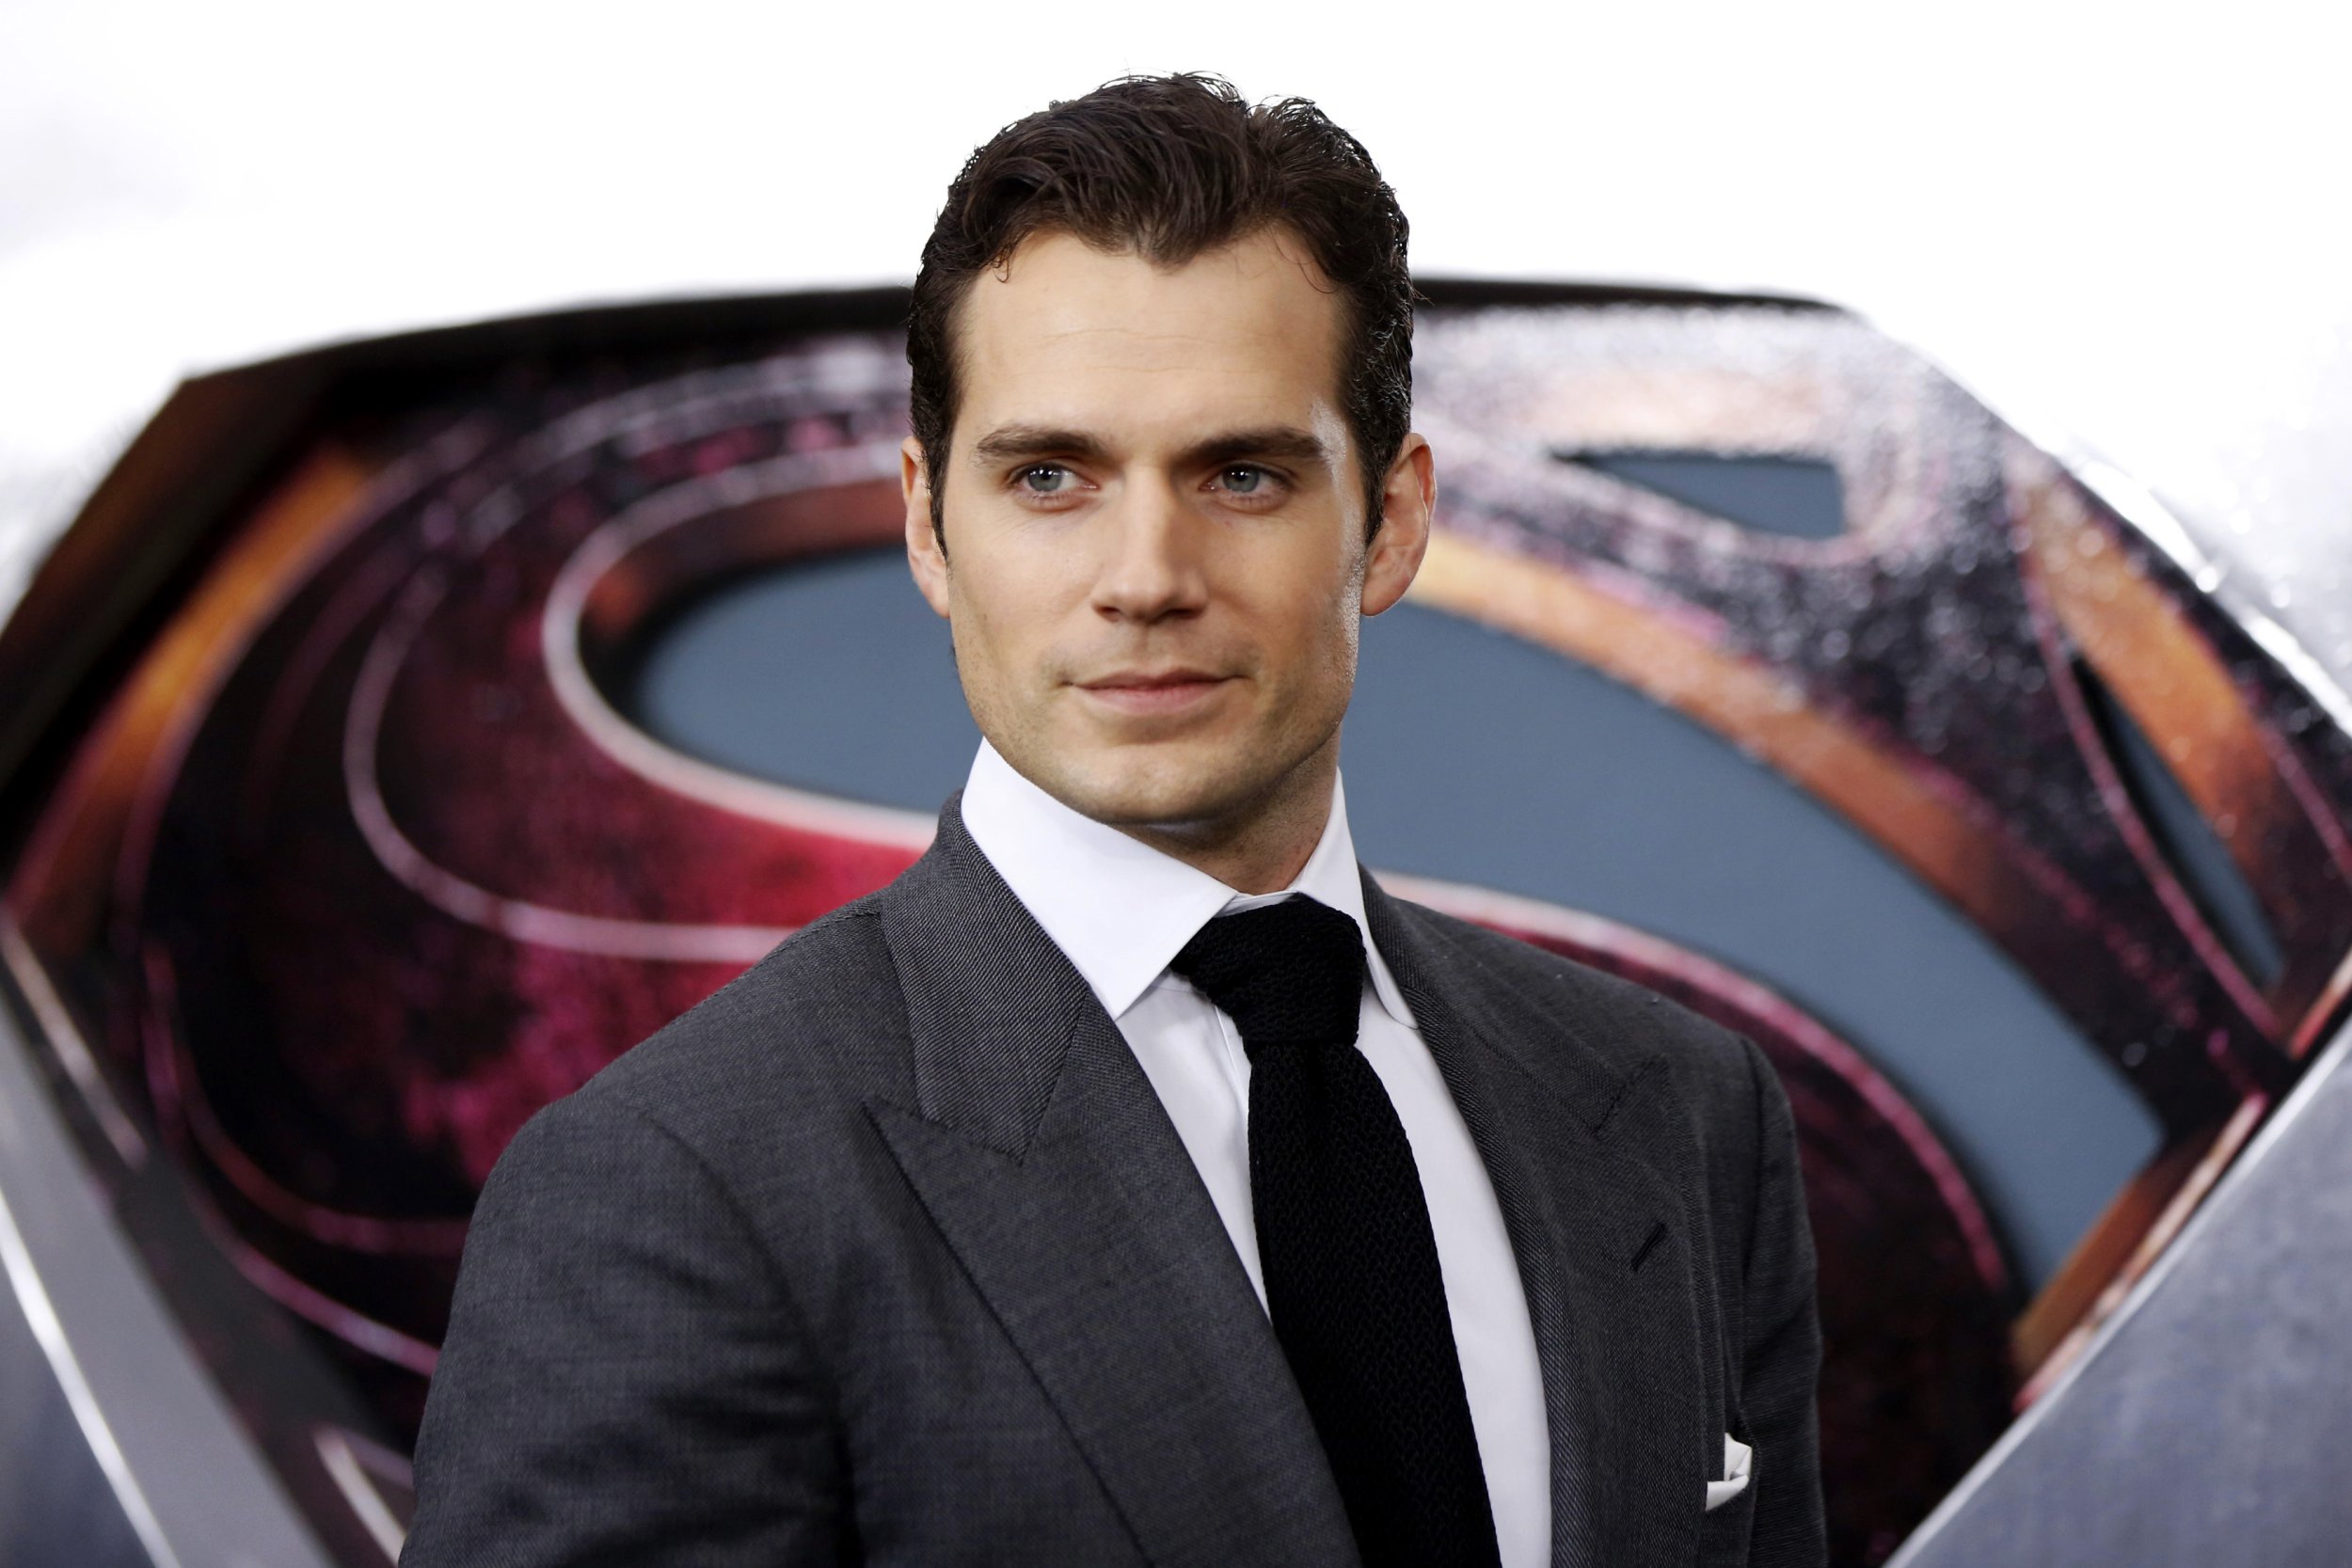 Henry Cavill introduces 'beautiful and brilliant' girlfriend Natalie  Viscuso, fans say 'Alexa, play That Should Be Me